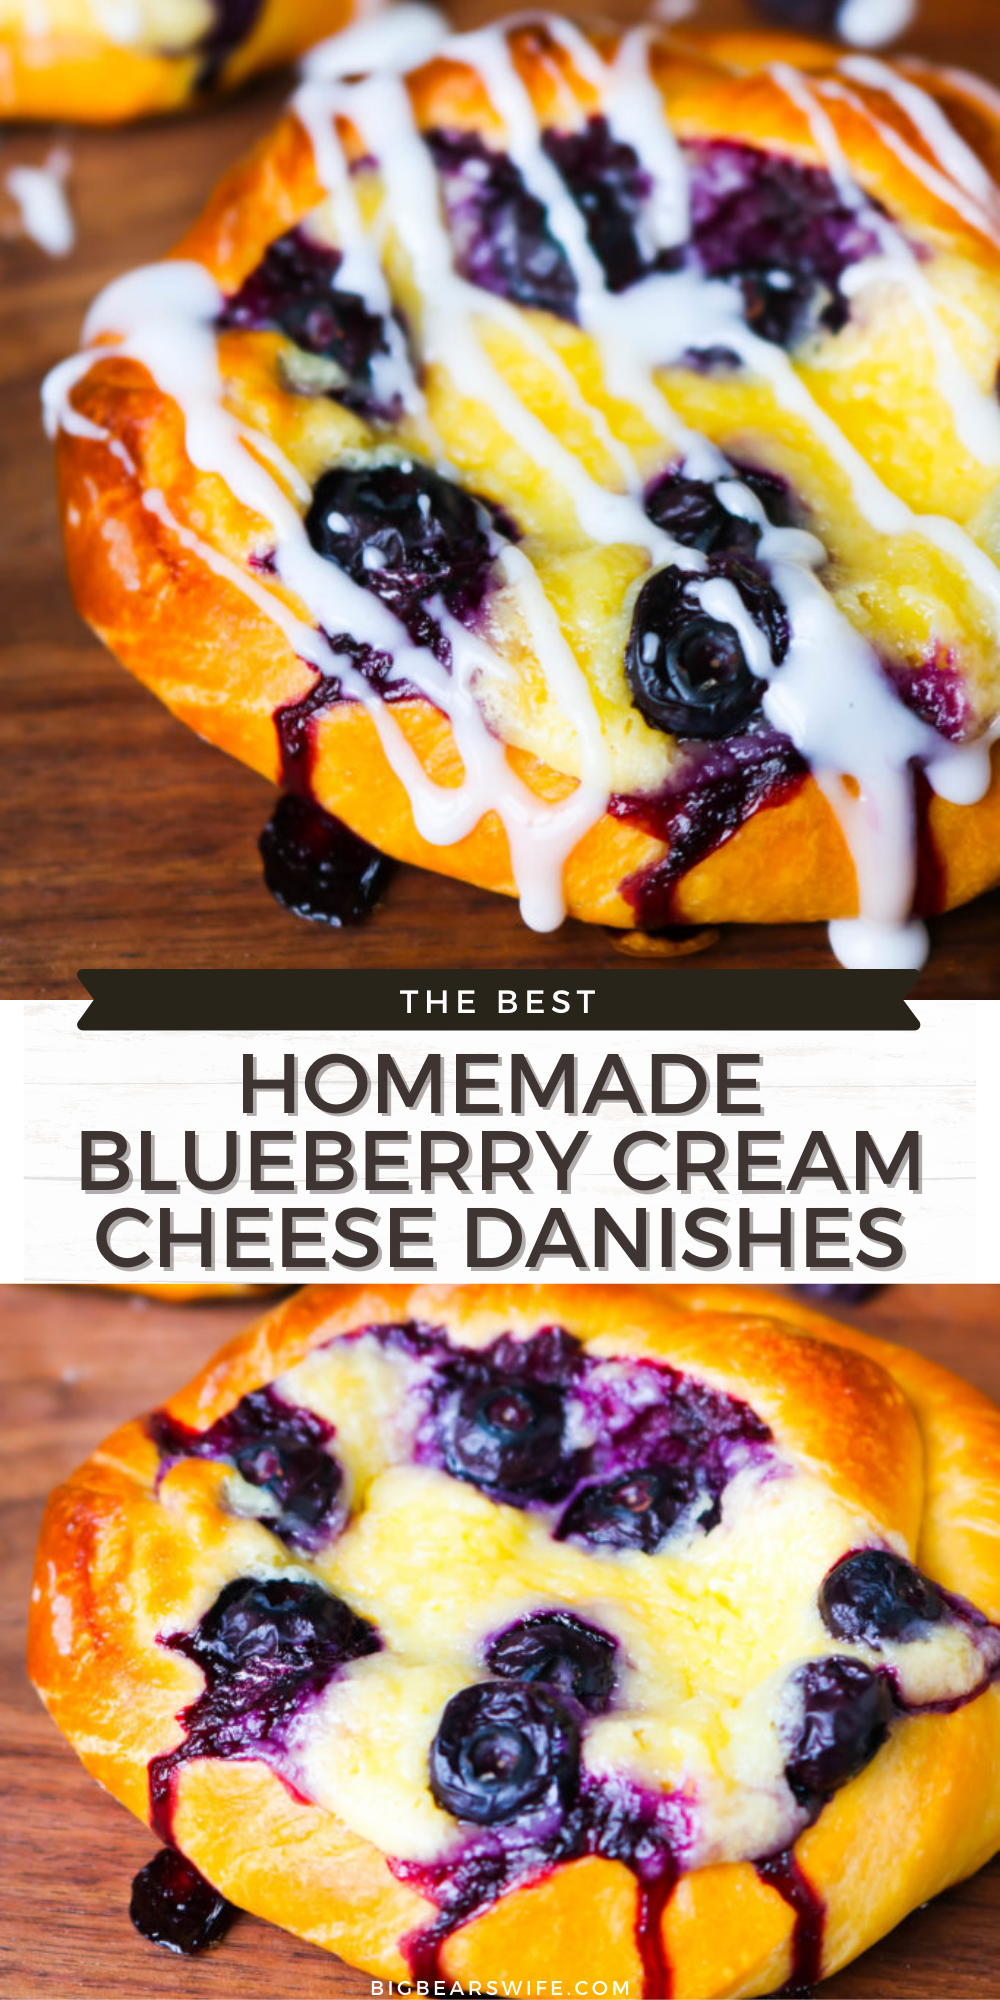 While I love a good shortcut when it comes to baking, Homemade Blueberry Cream Cheese Danishes from scratch are 100% worth it! They're filled with a cream cheese filling and topped with fresh summer blueberries!  via @bigbearswife